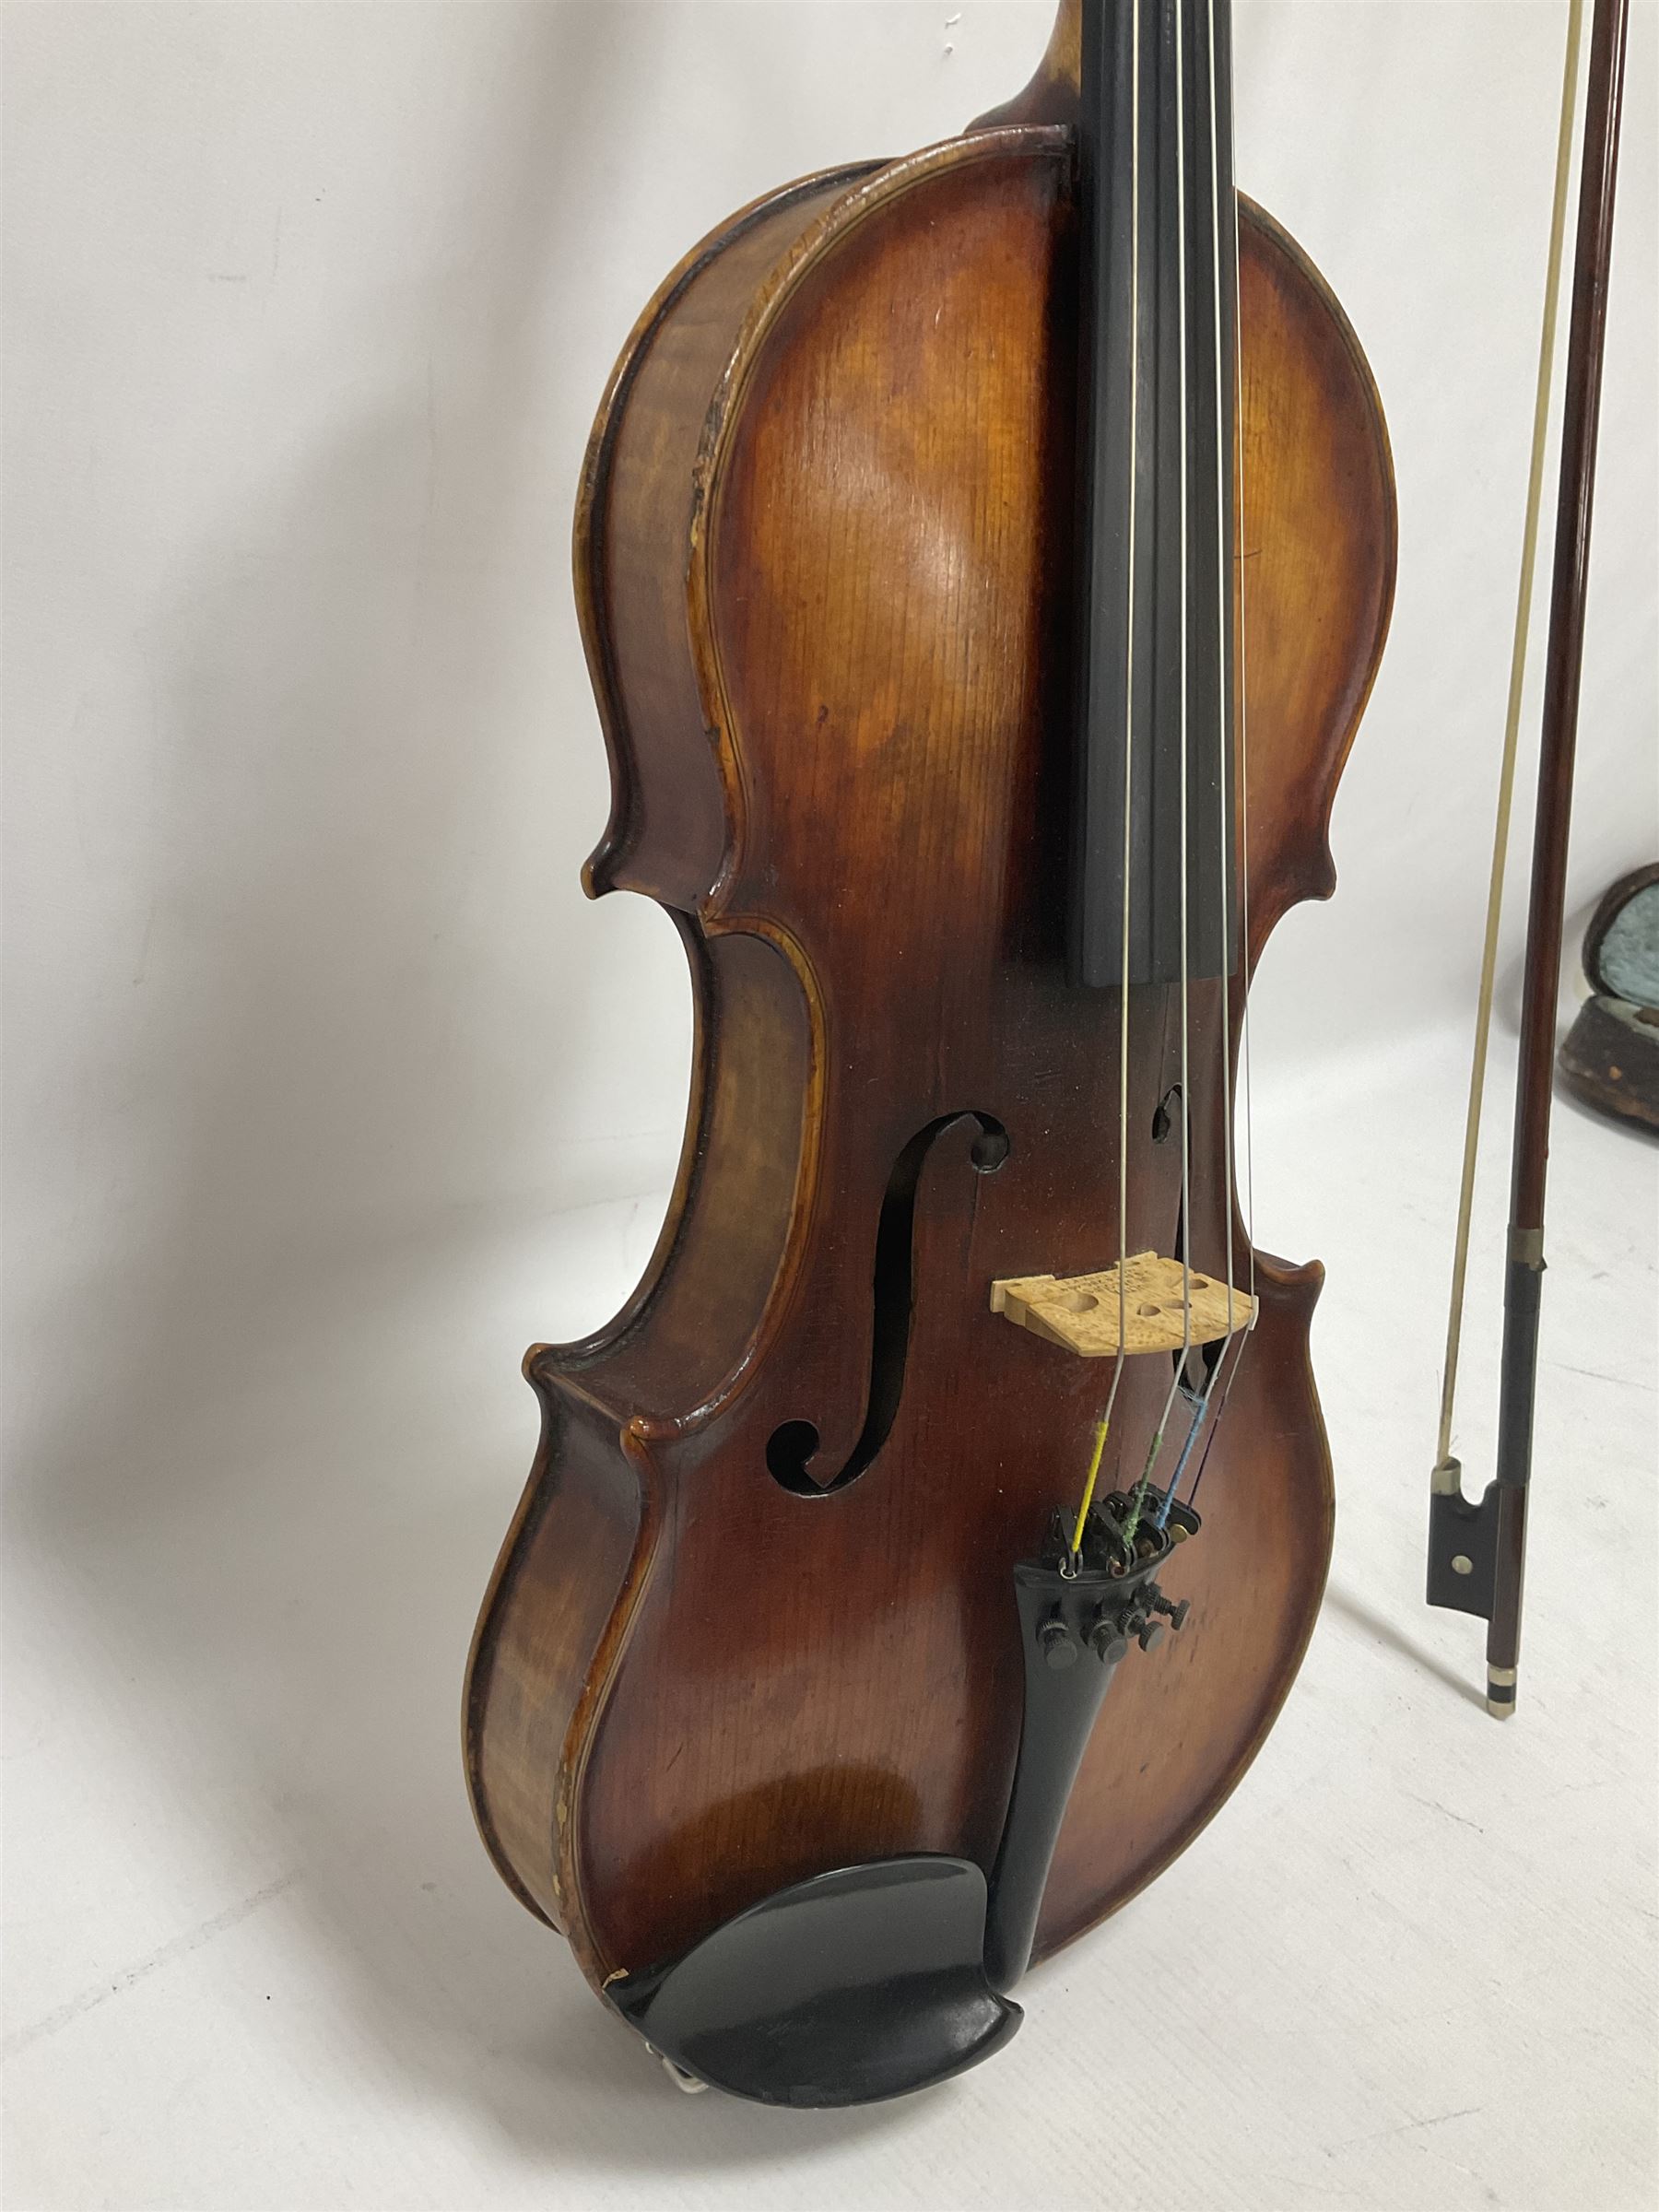 Full size violin and bow - Image 13 of 22